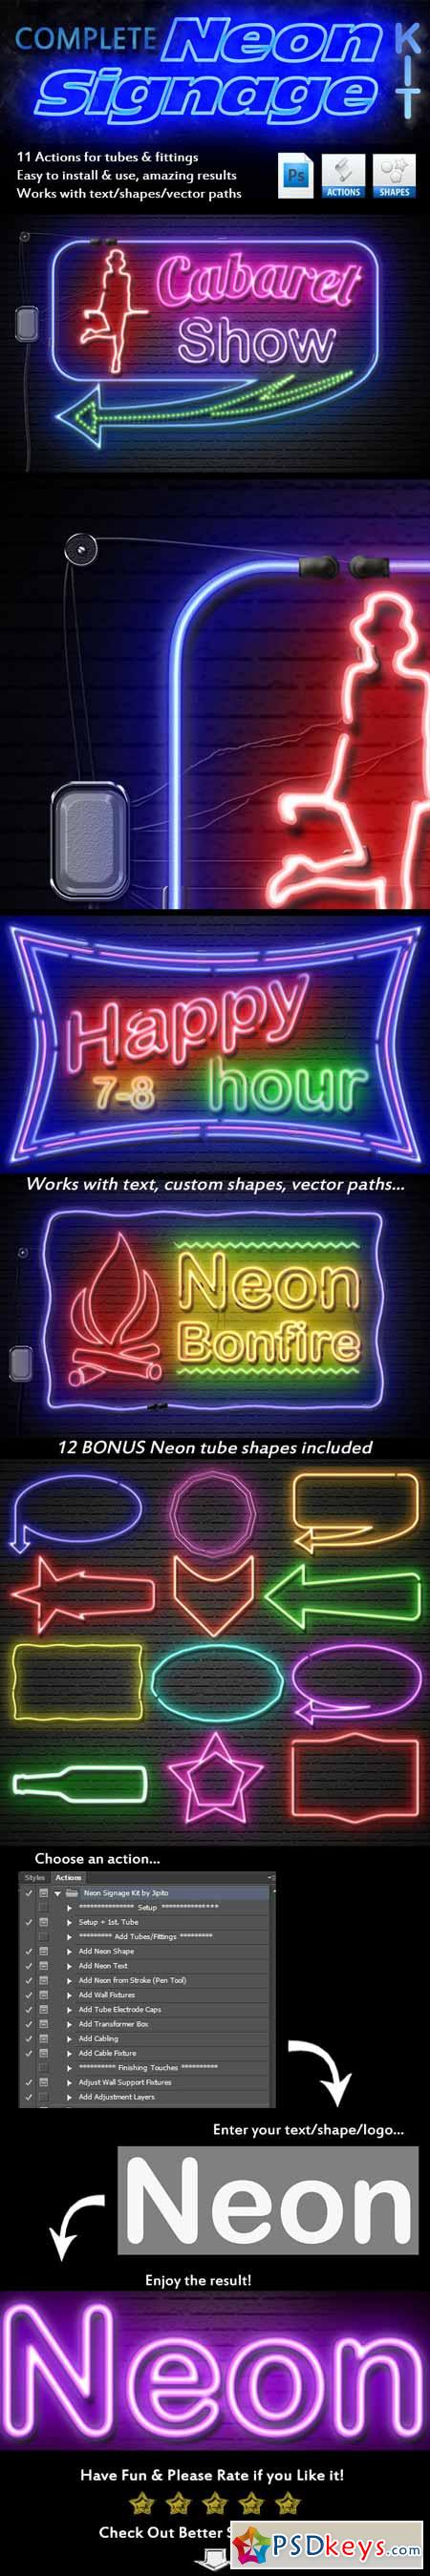 Complete Neon Signage Kit 12663196